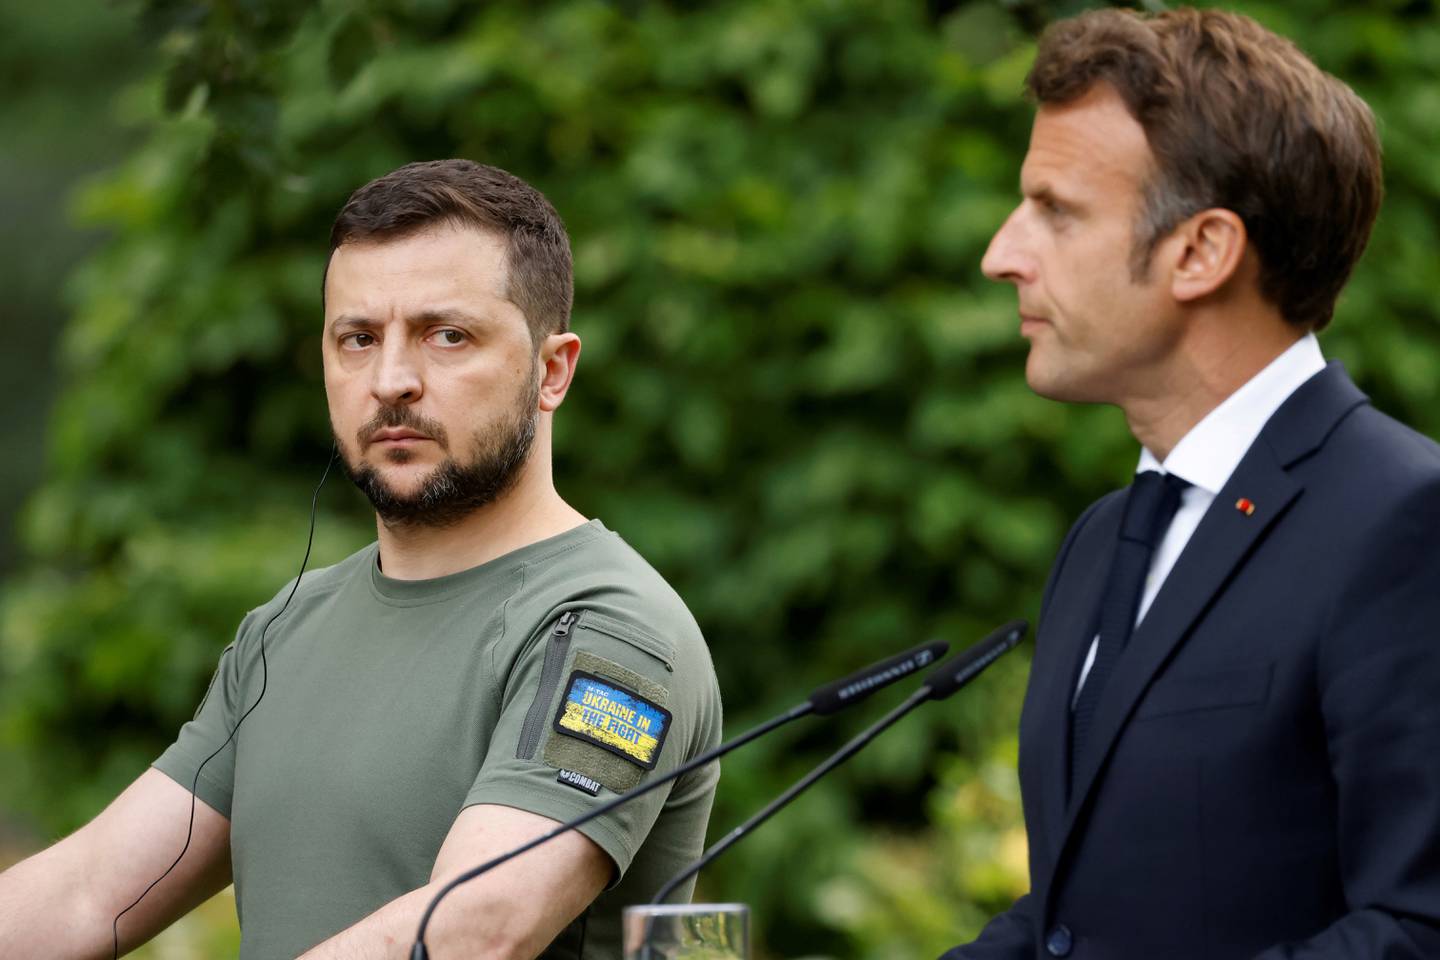 Mr Macron's proposal was meant partly to appease the EU ambitions of Ukrainian President Volodymyr Zelenskyy, left, and other leaders. AP 